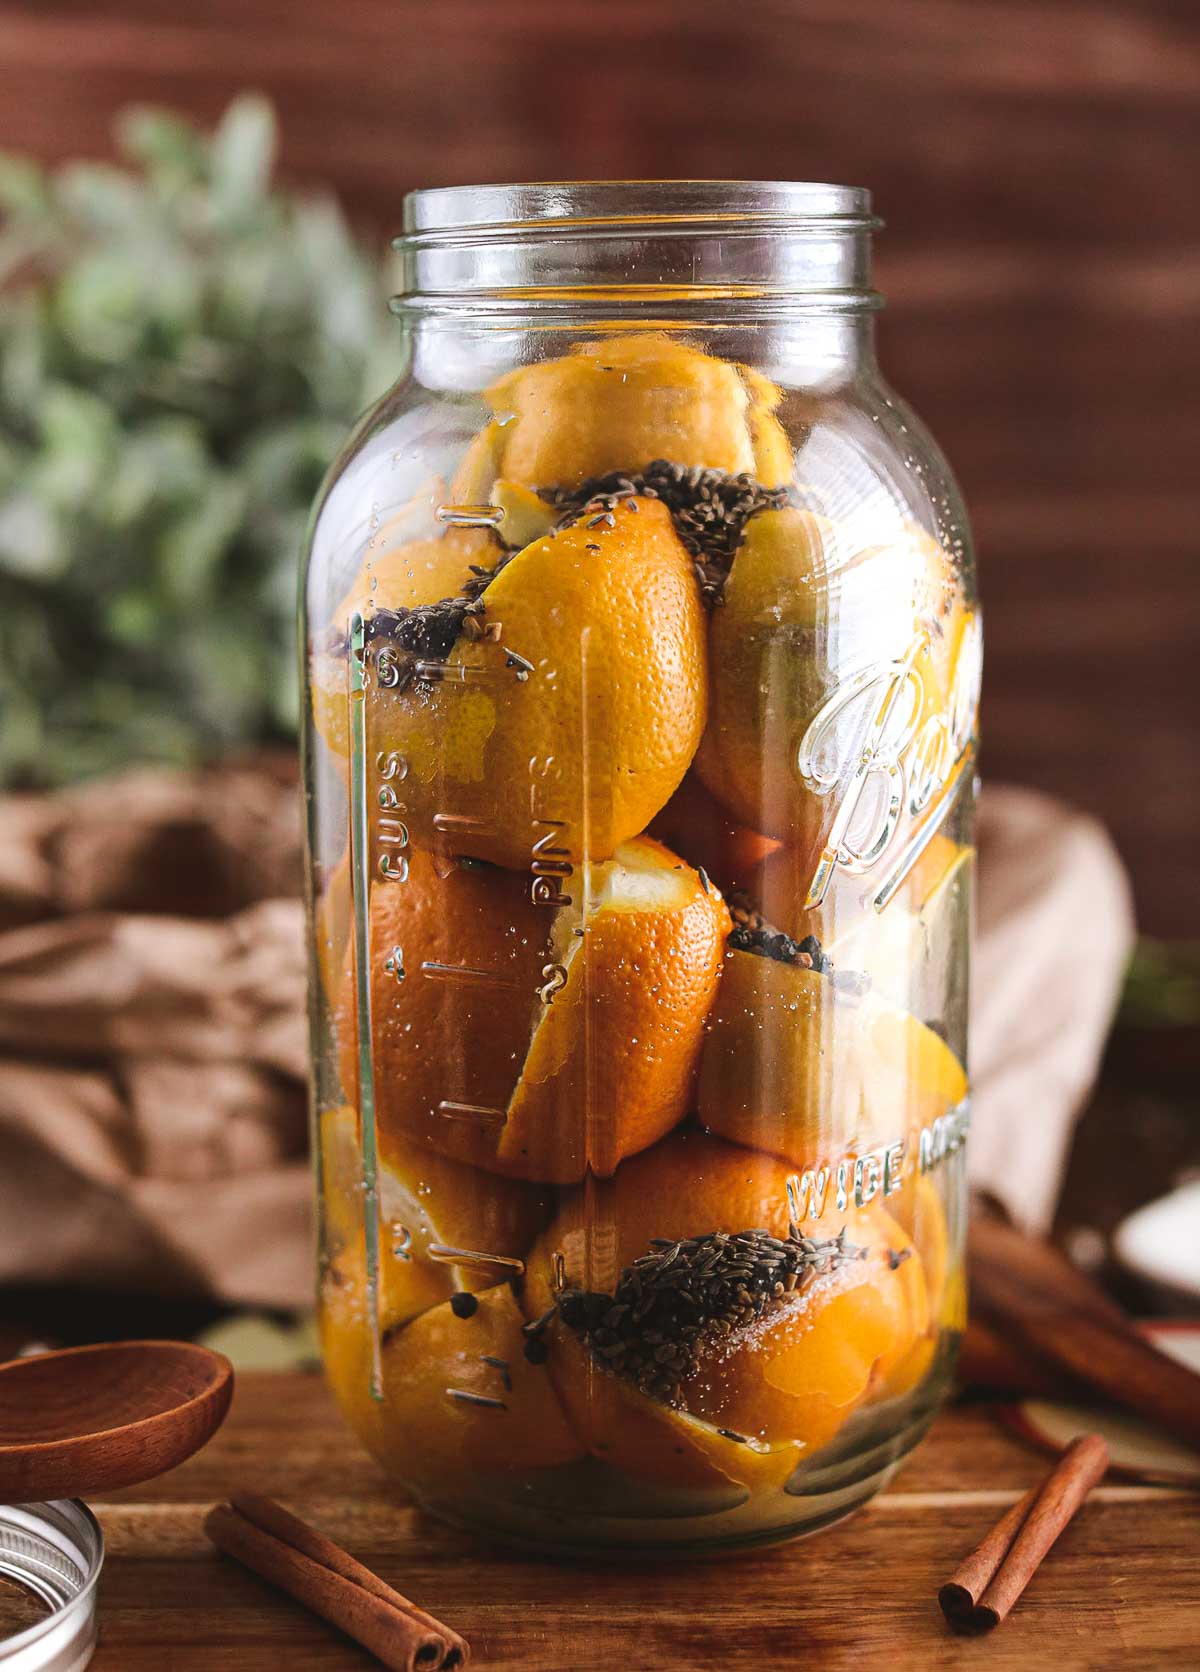 A large glass jar completely full to the top with whole meyer lemons which have been quartered but not completely severed. Spices can be seen interspersed with the lemons.